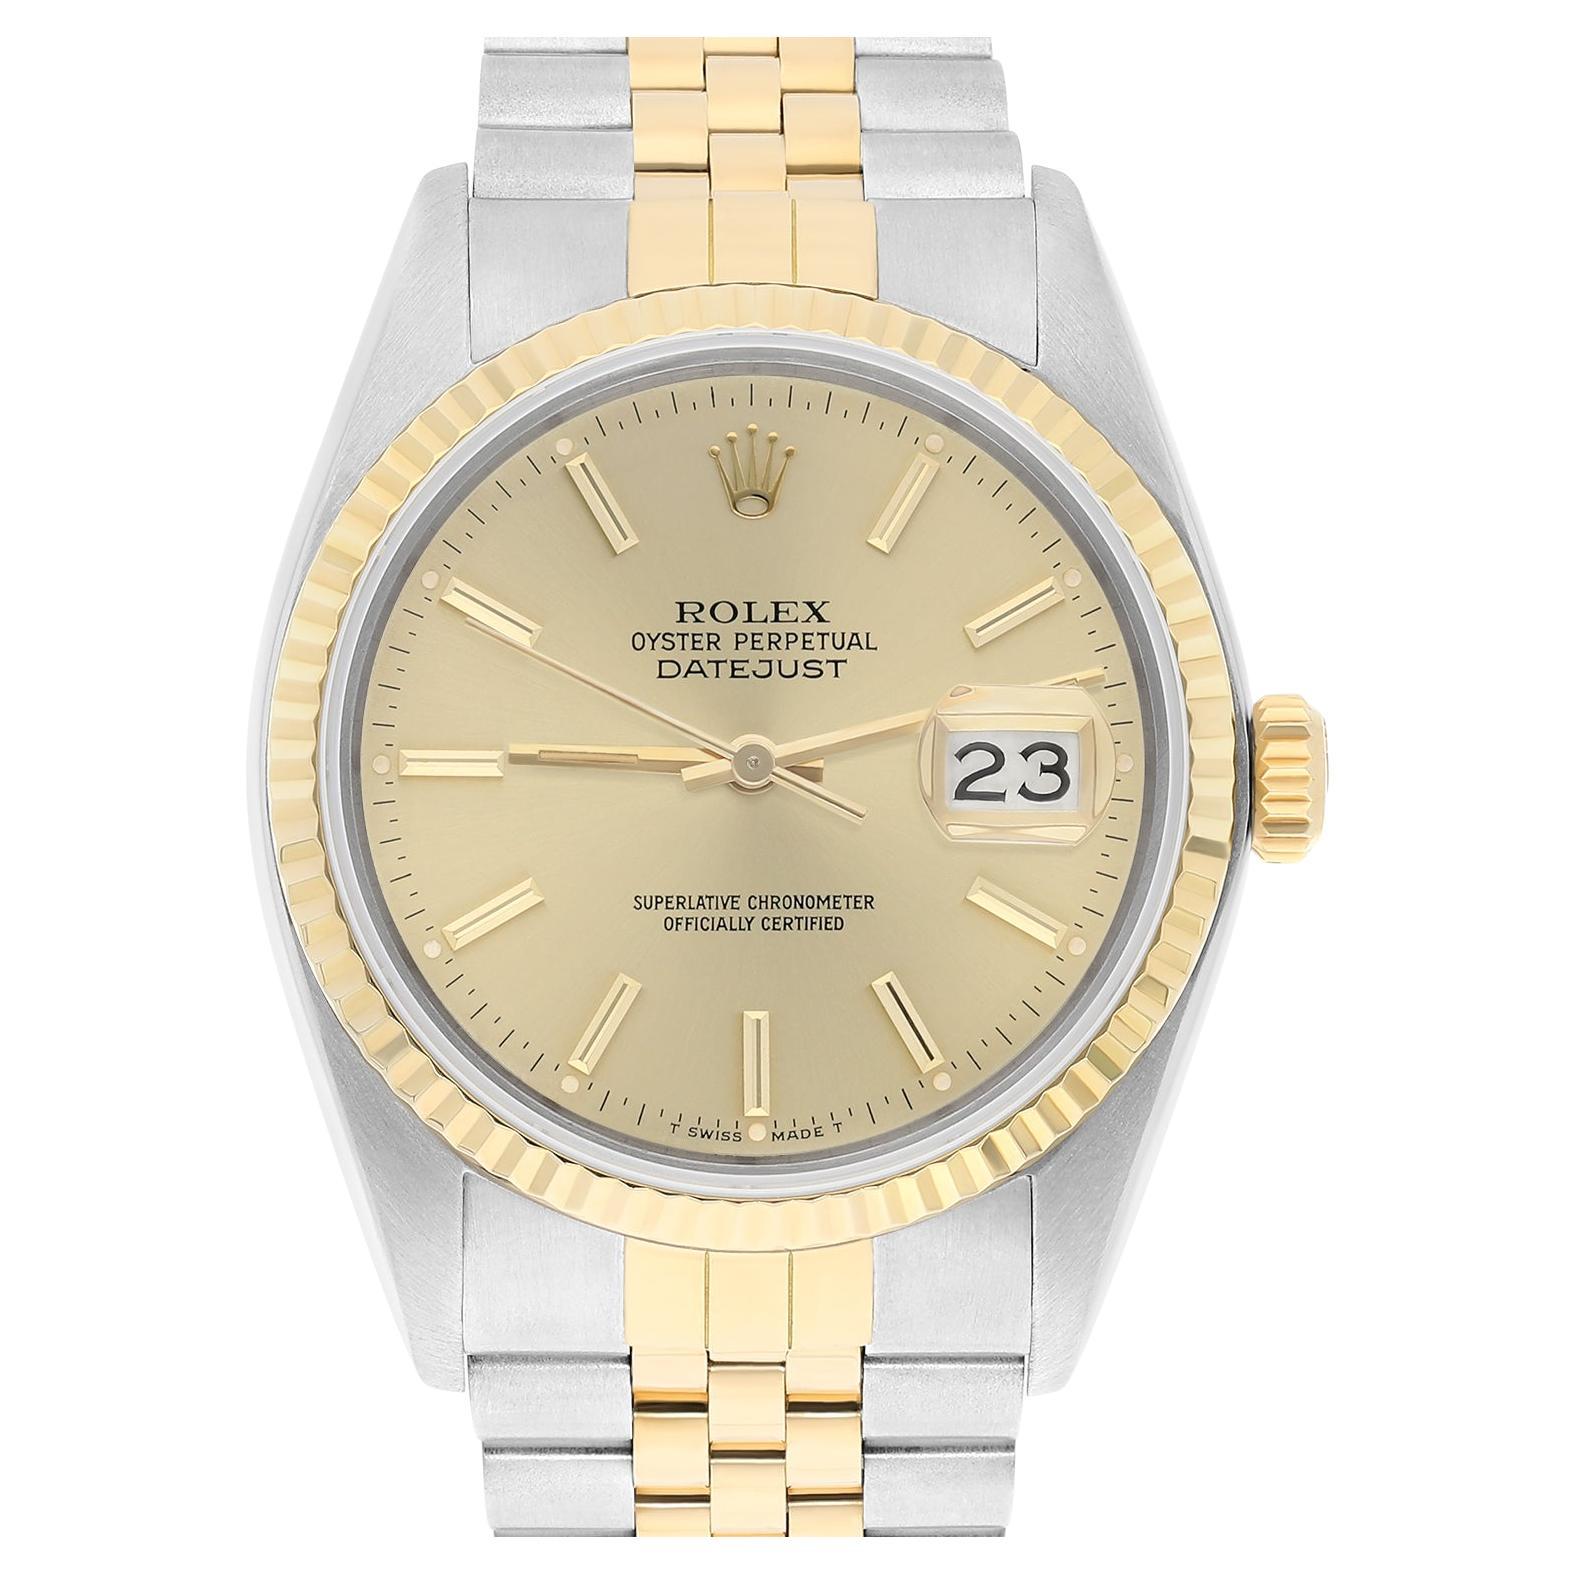 Rolex Datejust 36mm Two Tone Champagne lndex Dial Jubilee 16013 Circa 1986  For Sale